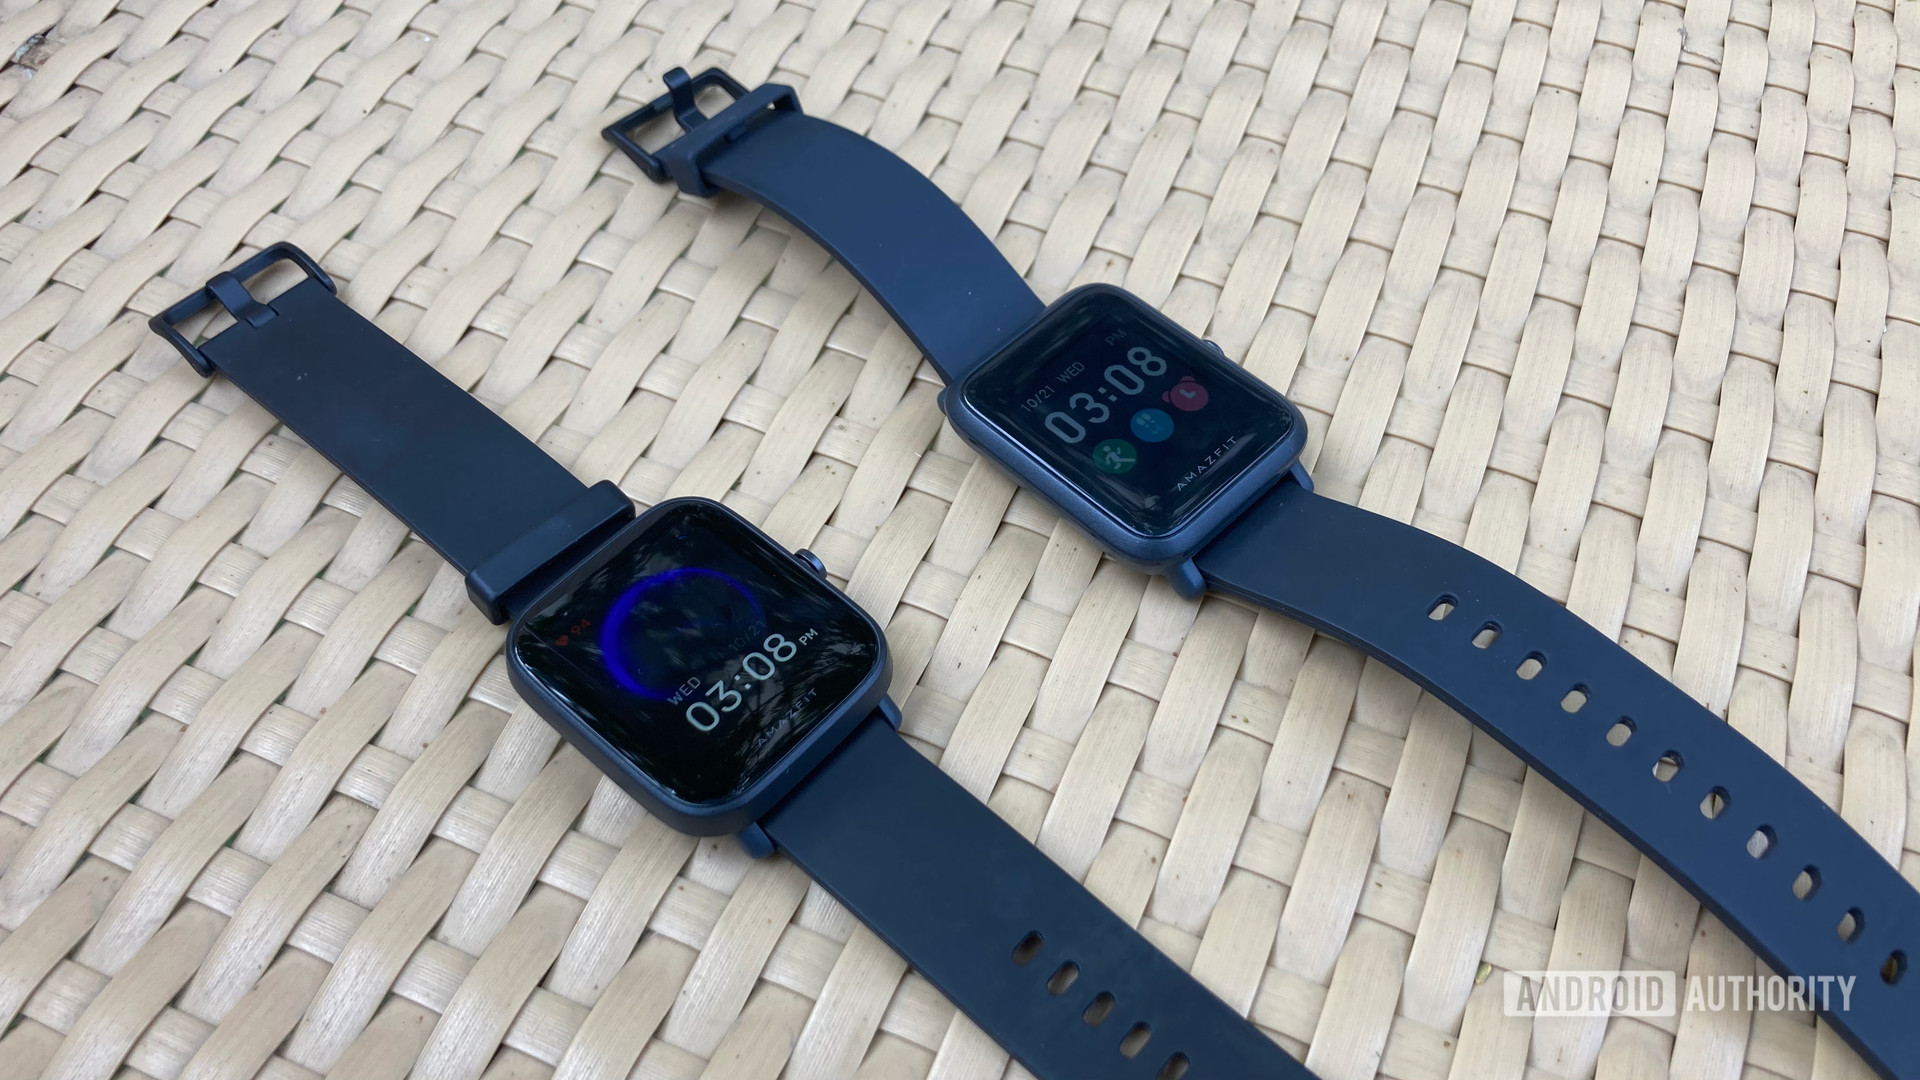 Huami Amazfit Bip U review: A fitness watch that's a bang for your buck